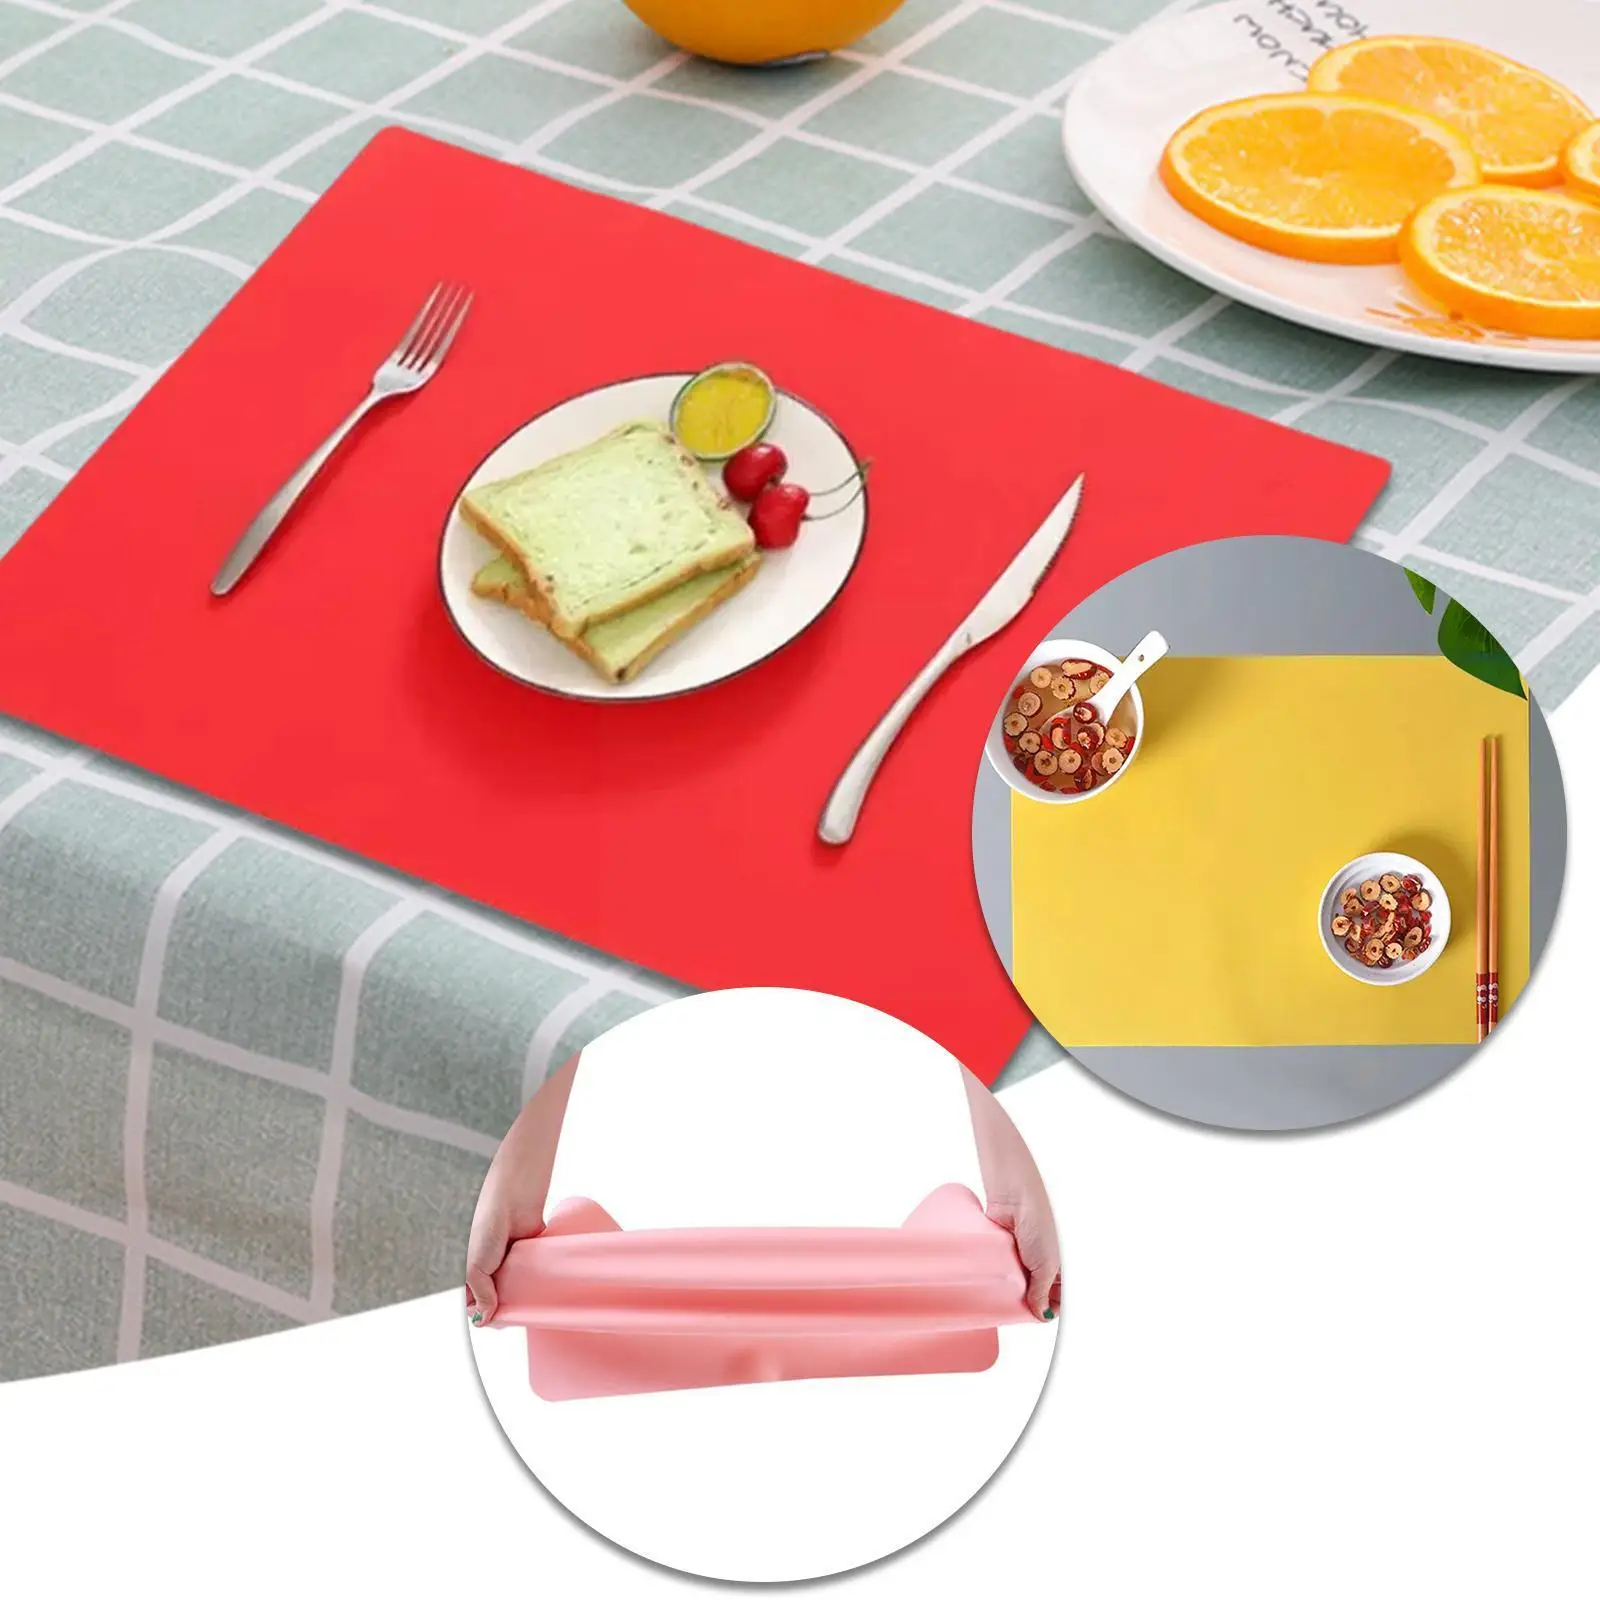 

Silicone Mat Heat Resistant Sheet Waterproof Pad Kitchen Counter Placemat Protector Craft Table Mats Nonslip Vinyl X7B7